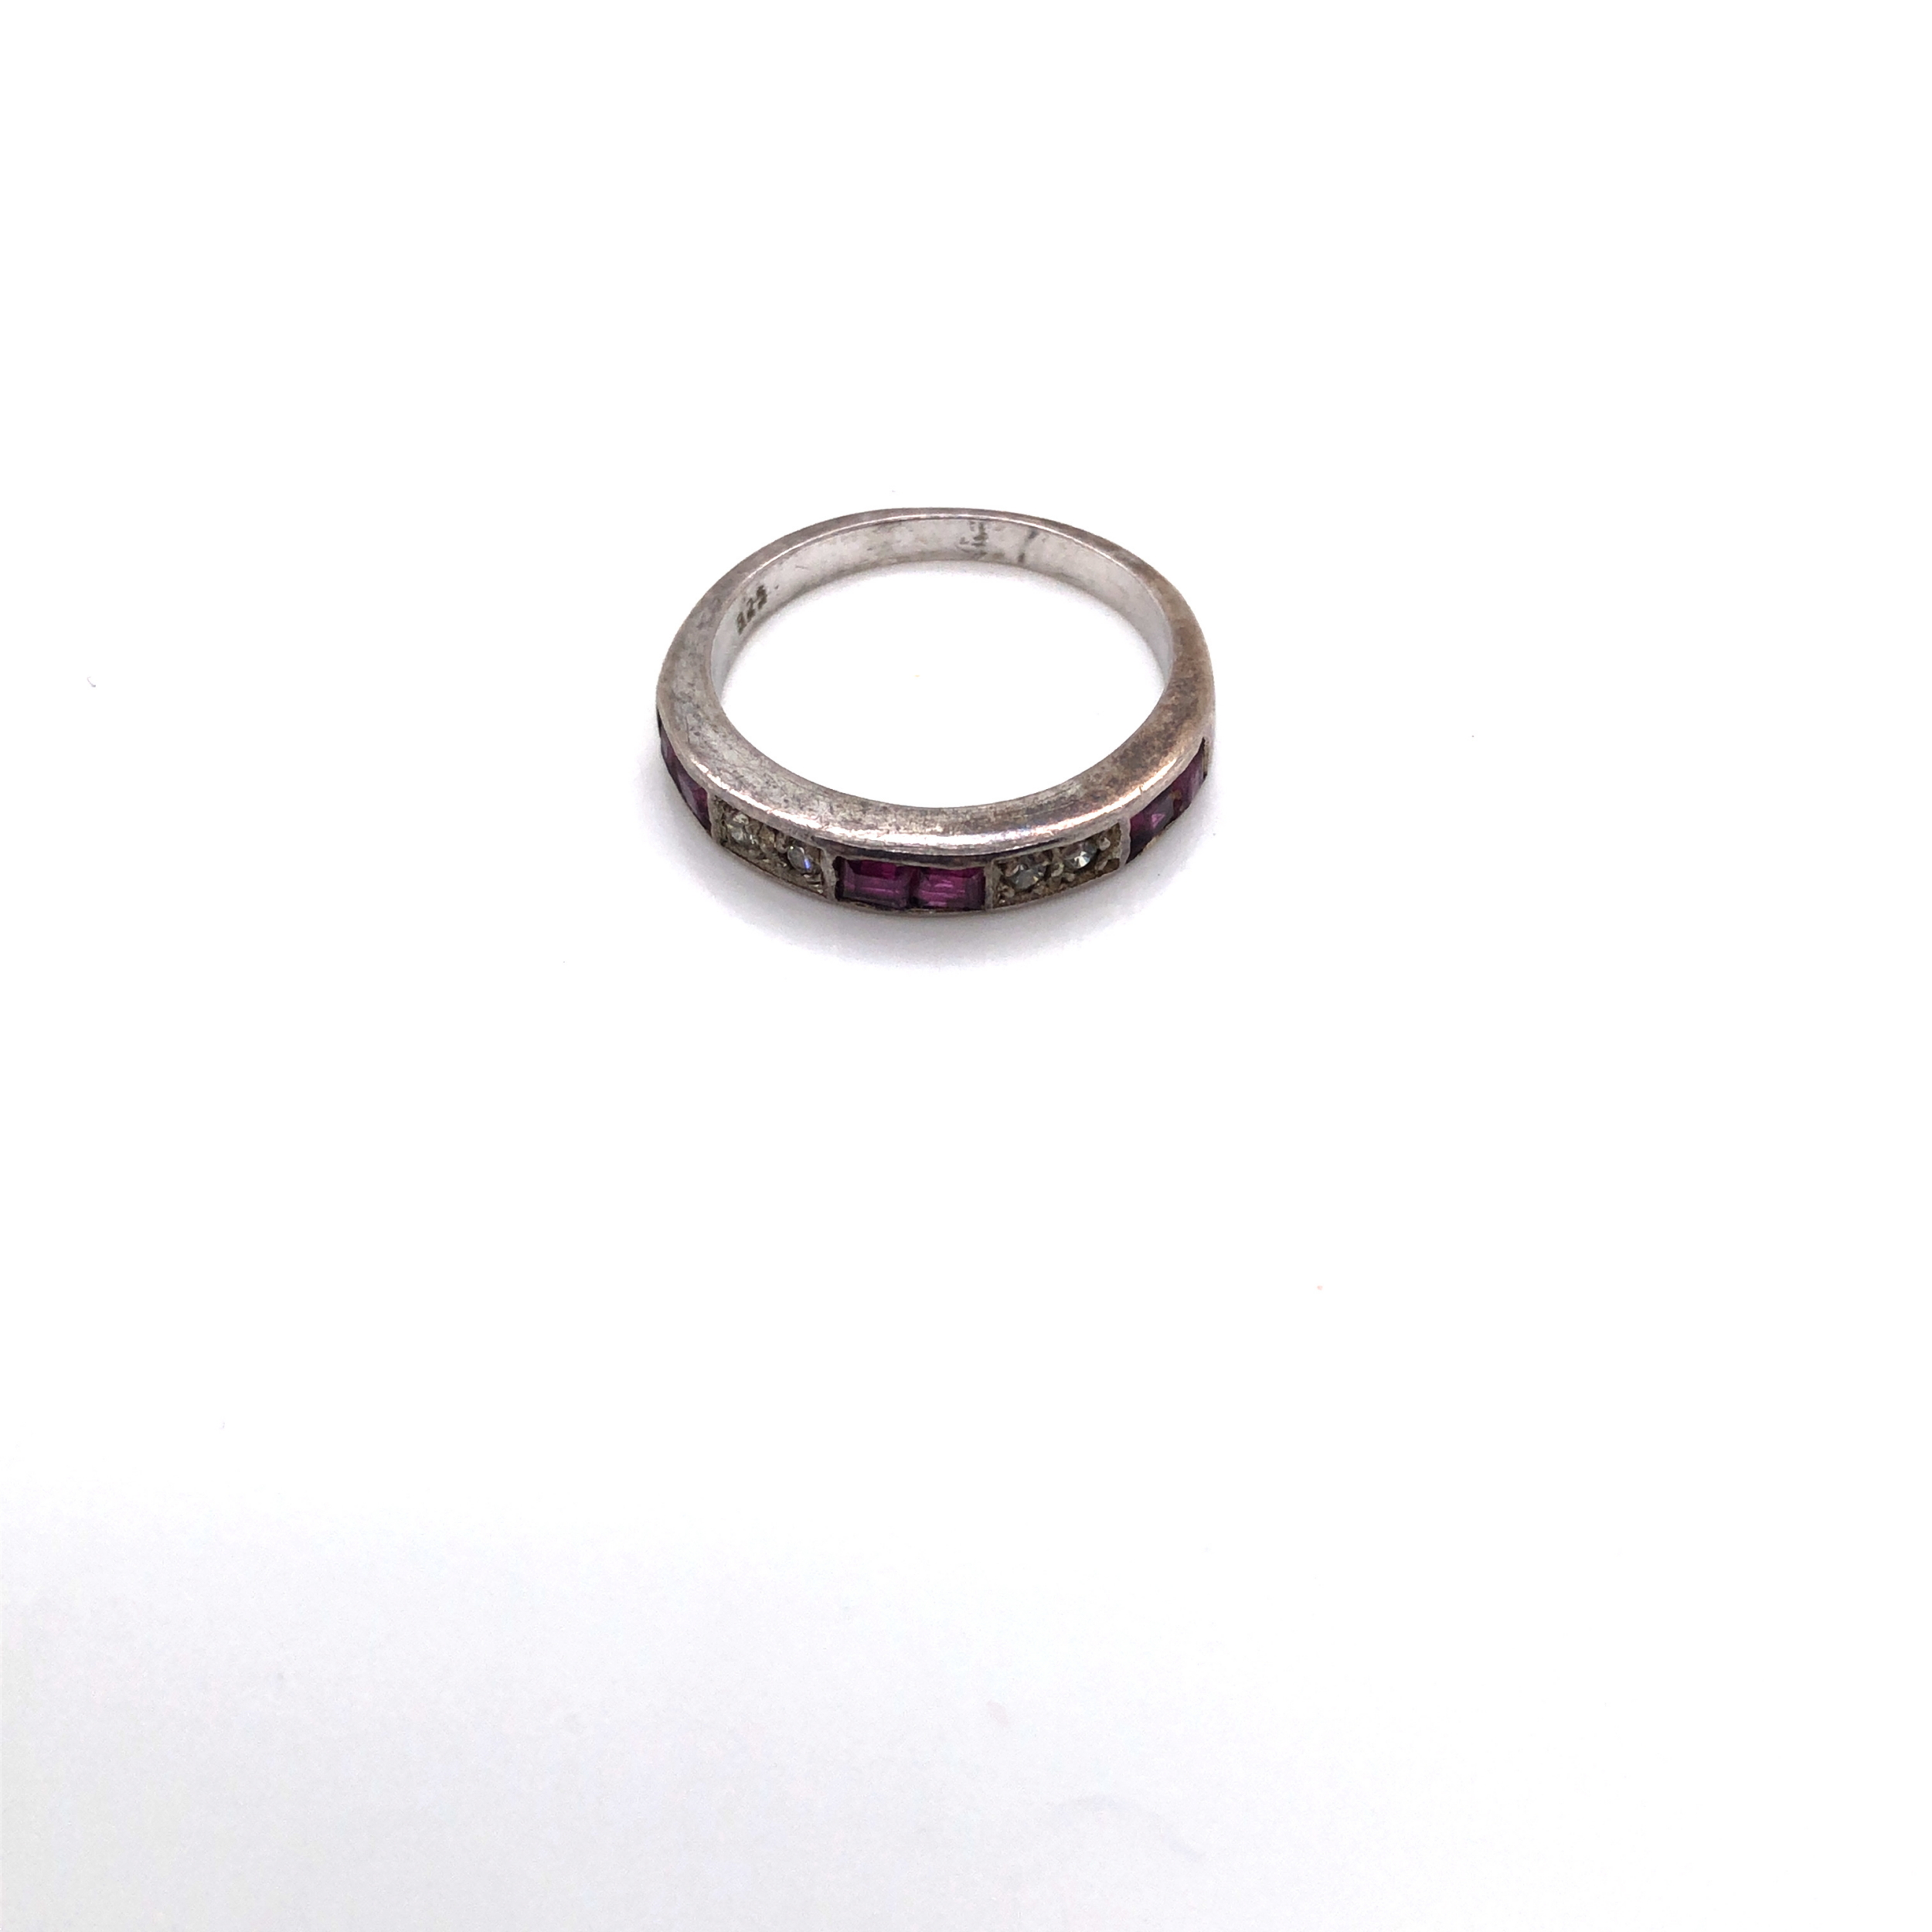 A VINTAGE RUBY AND CUBIC ZIRCONIA CHANNEL SET HALF ETERNITY RING SHANK STAMPED 925 AND ASSESSED AS - Image 2 of 2